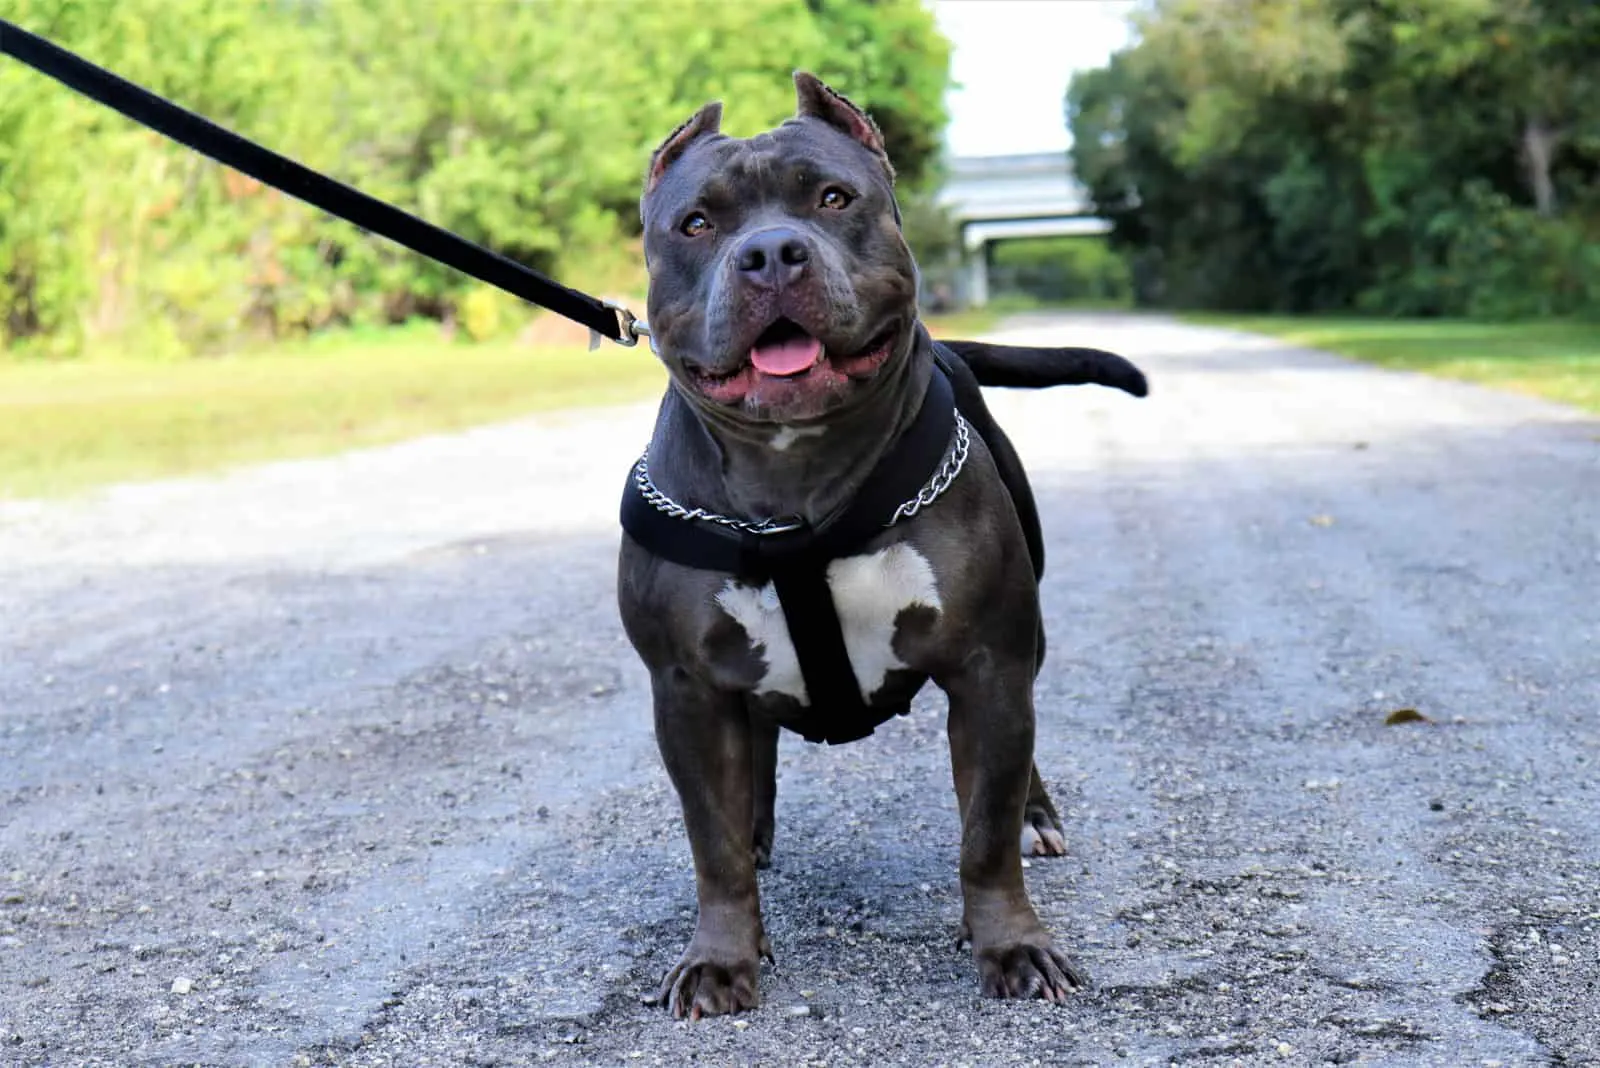 Blue Pitbull on a leash stands in the way